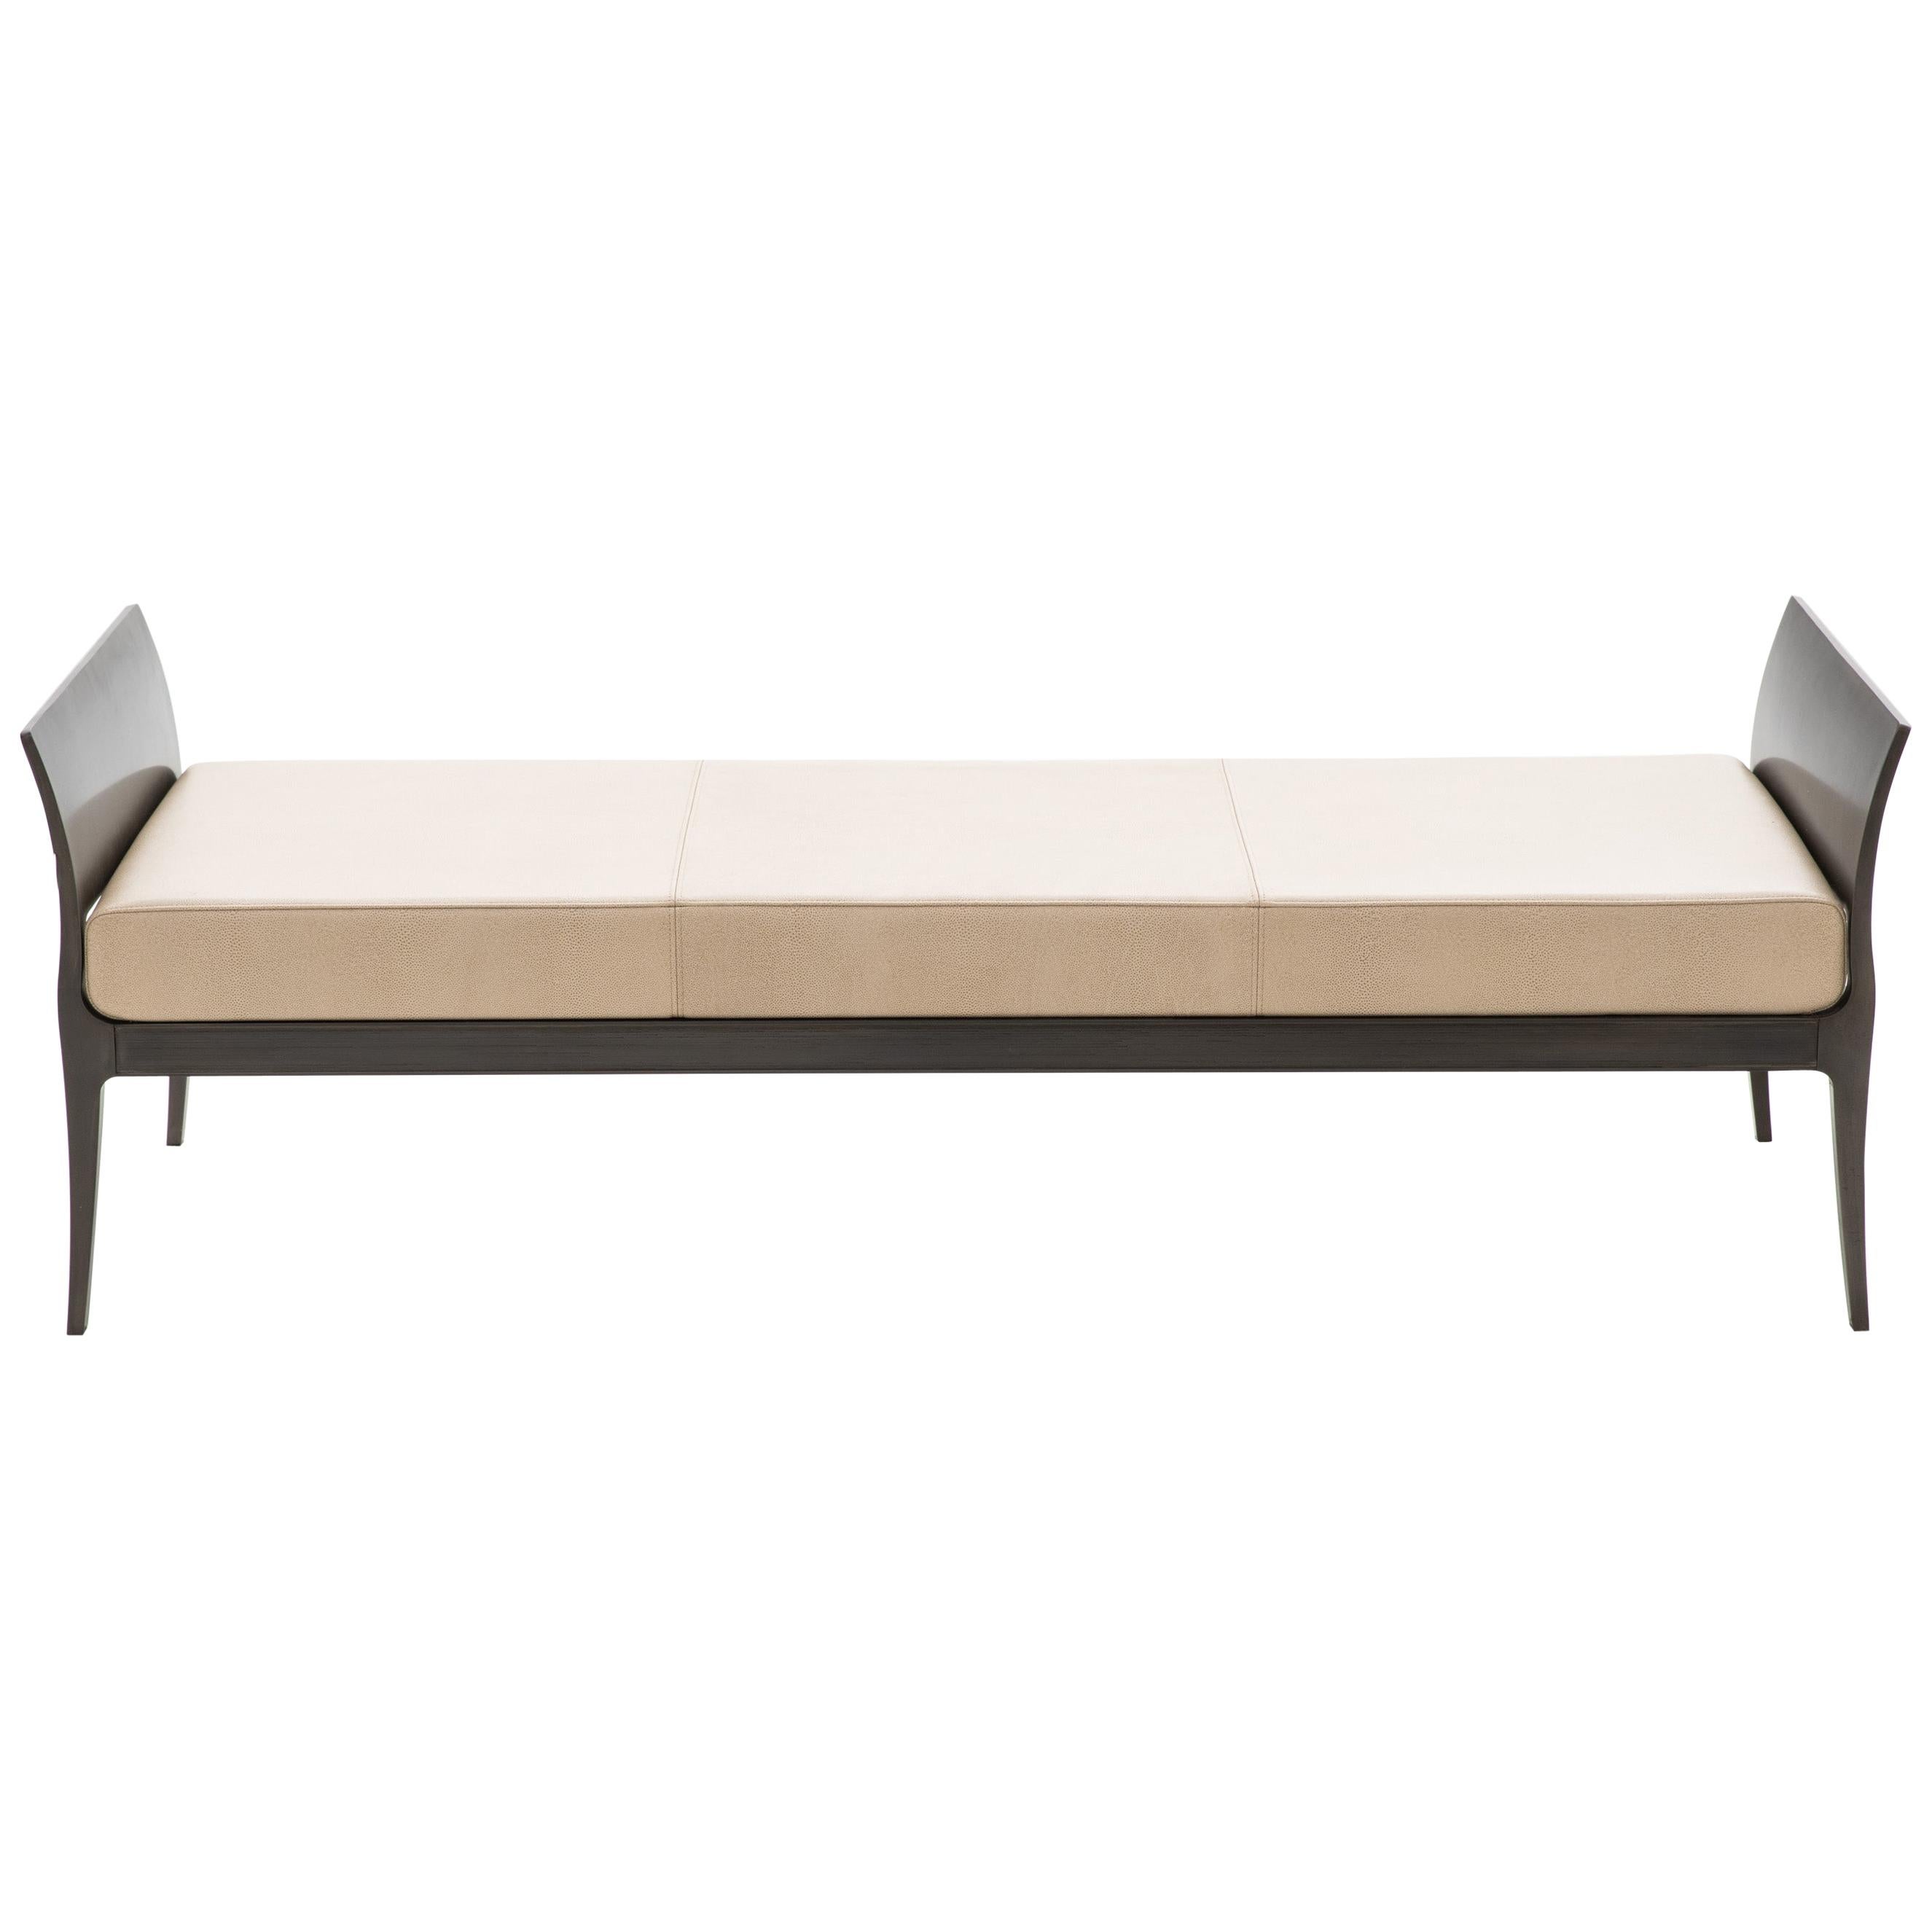 HOLLY HUNT Garbo Daybed in Patina Finish